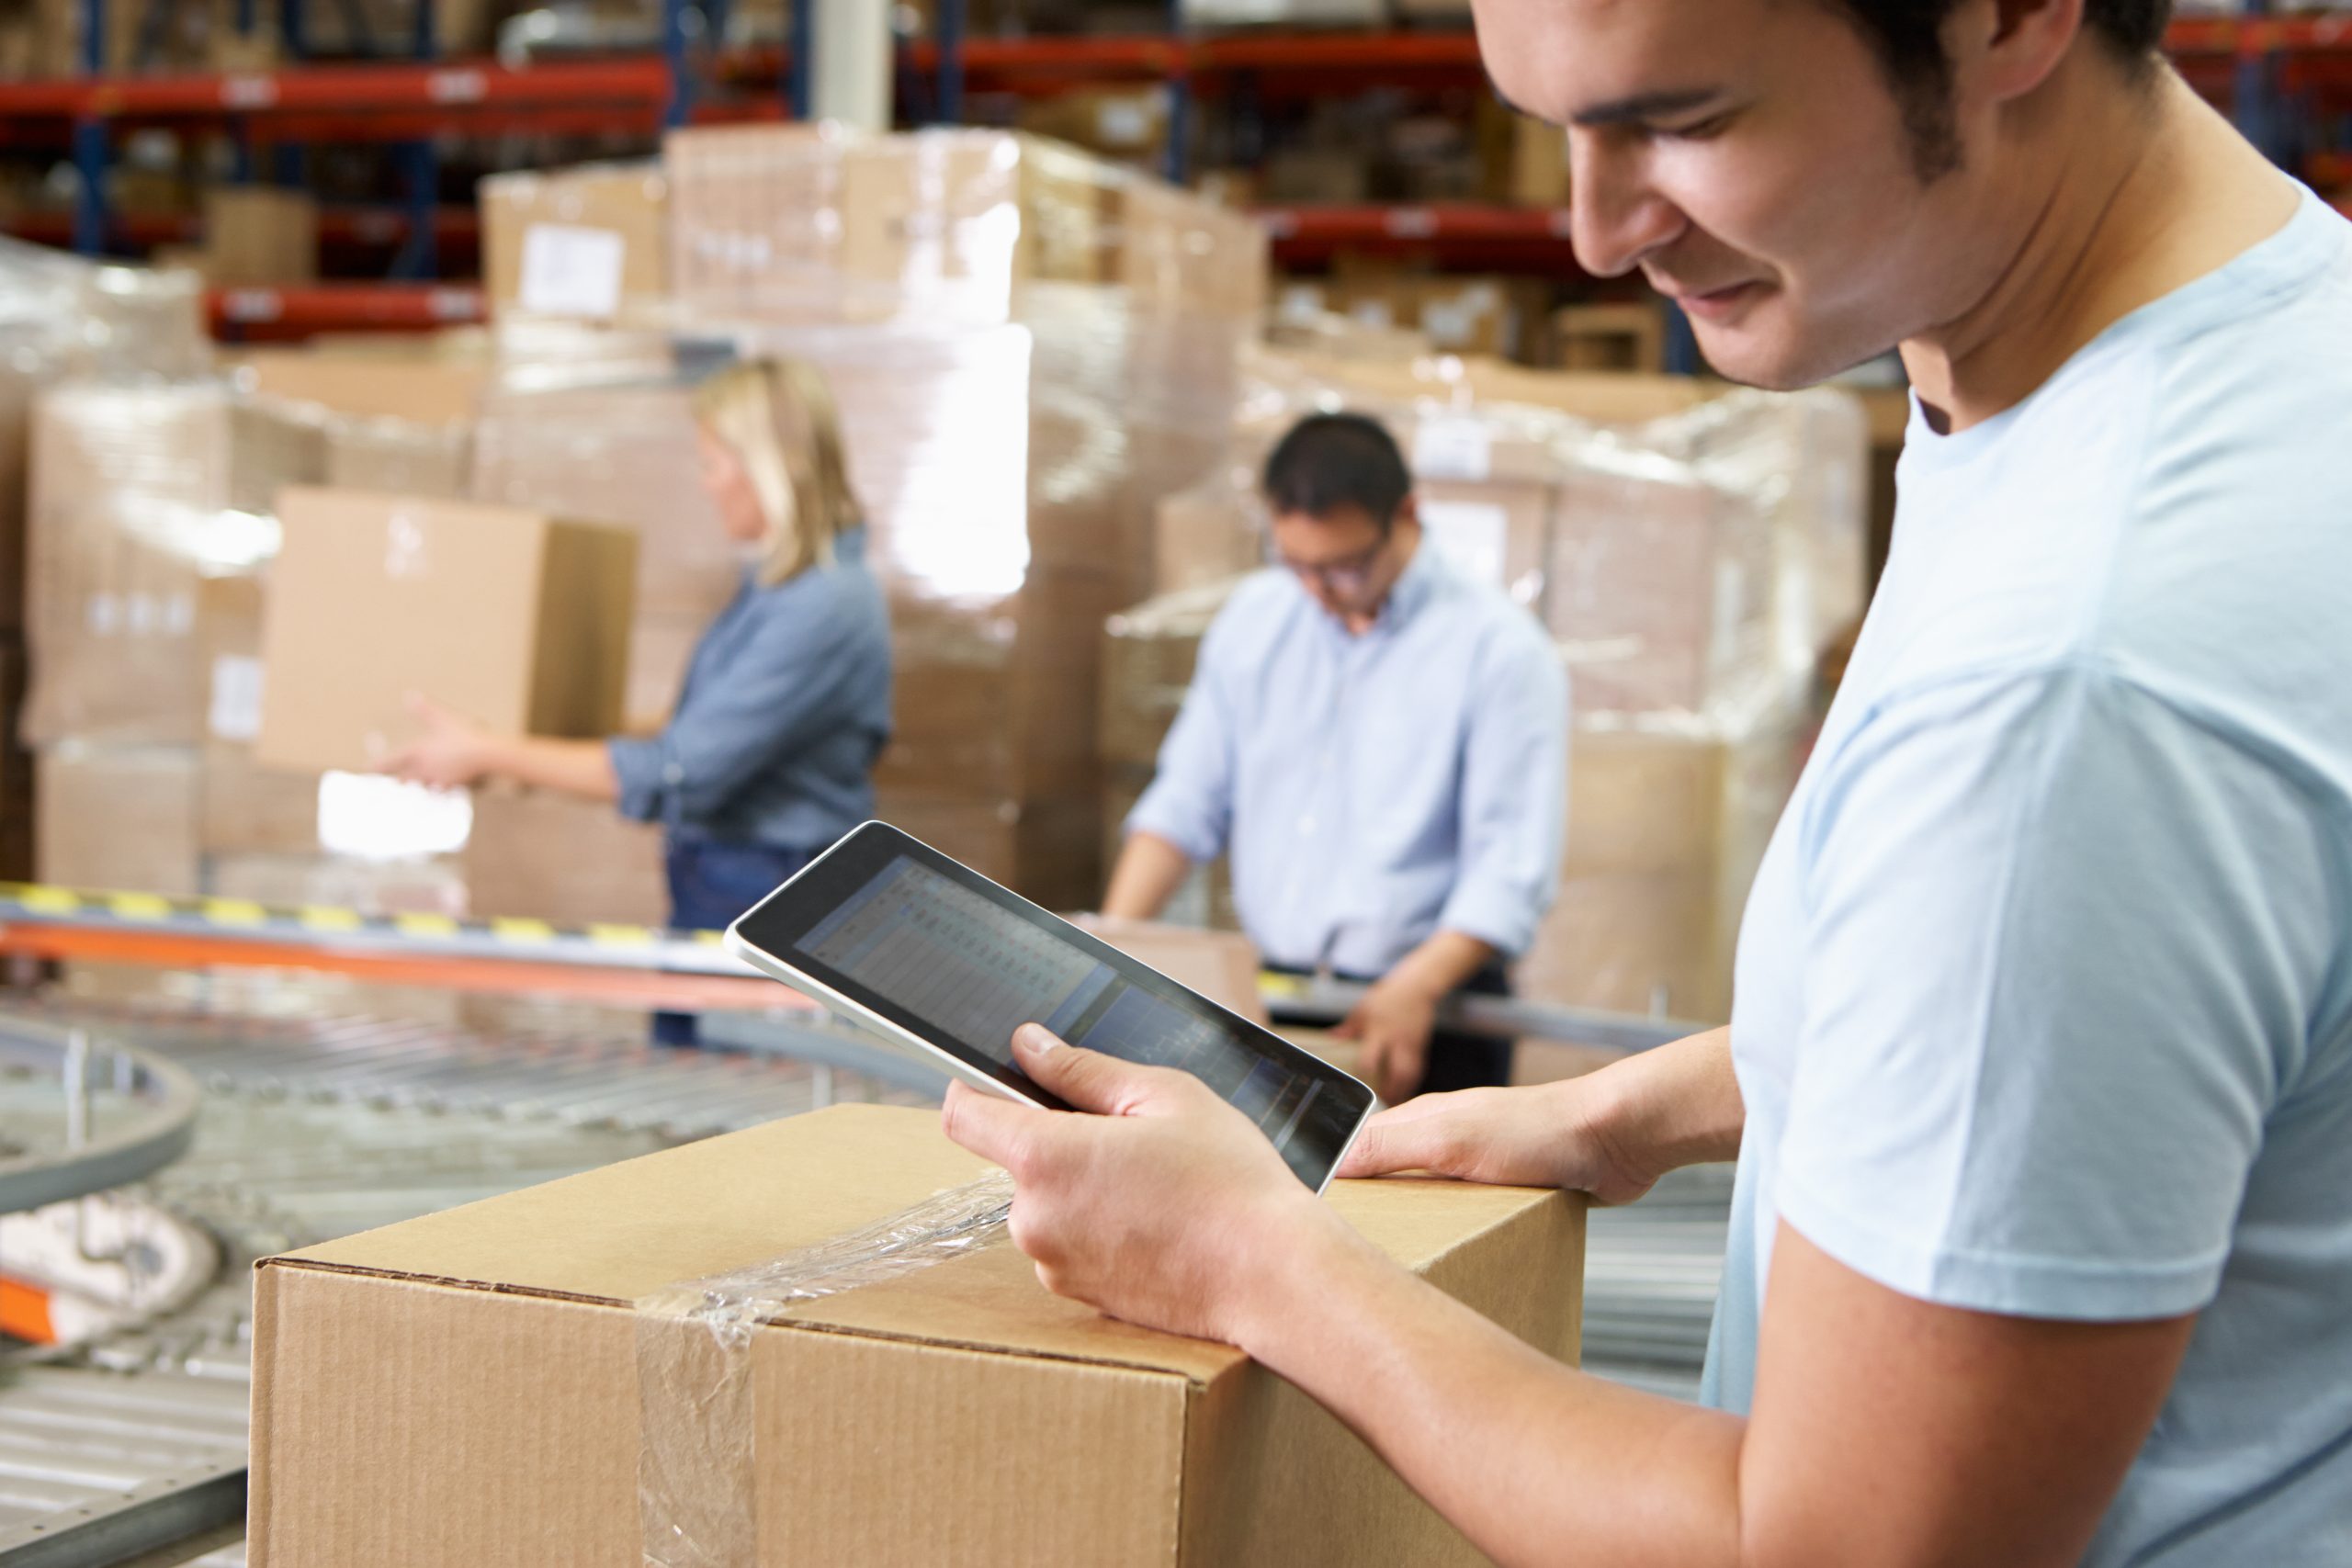 Tips for saving time and money on yur next shipment